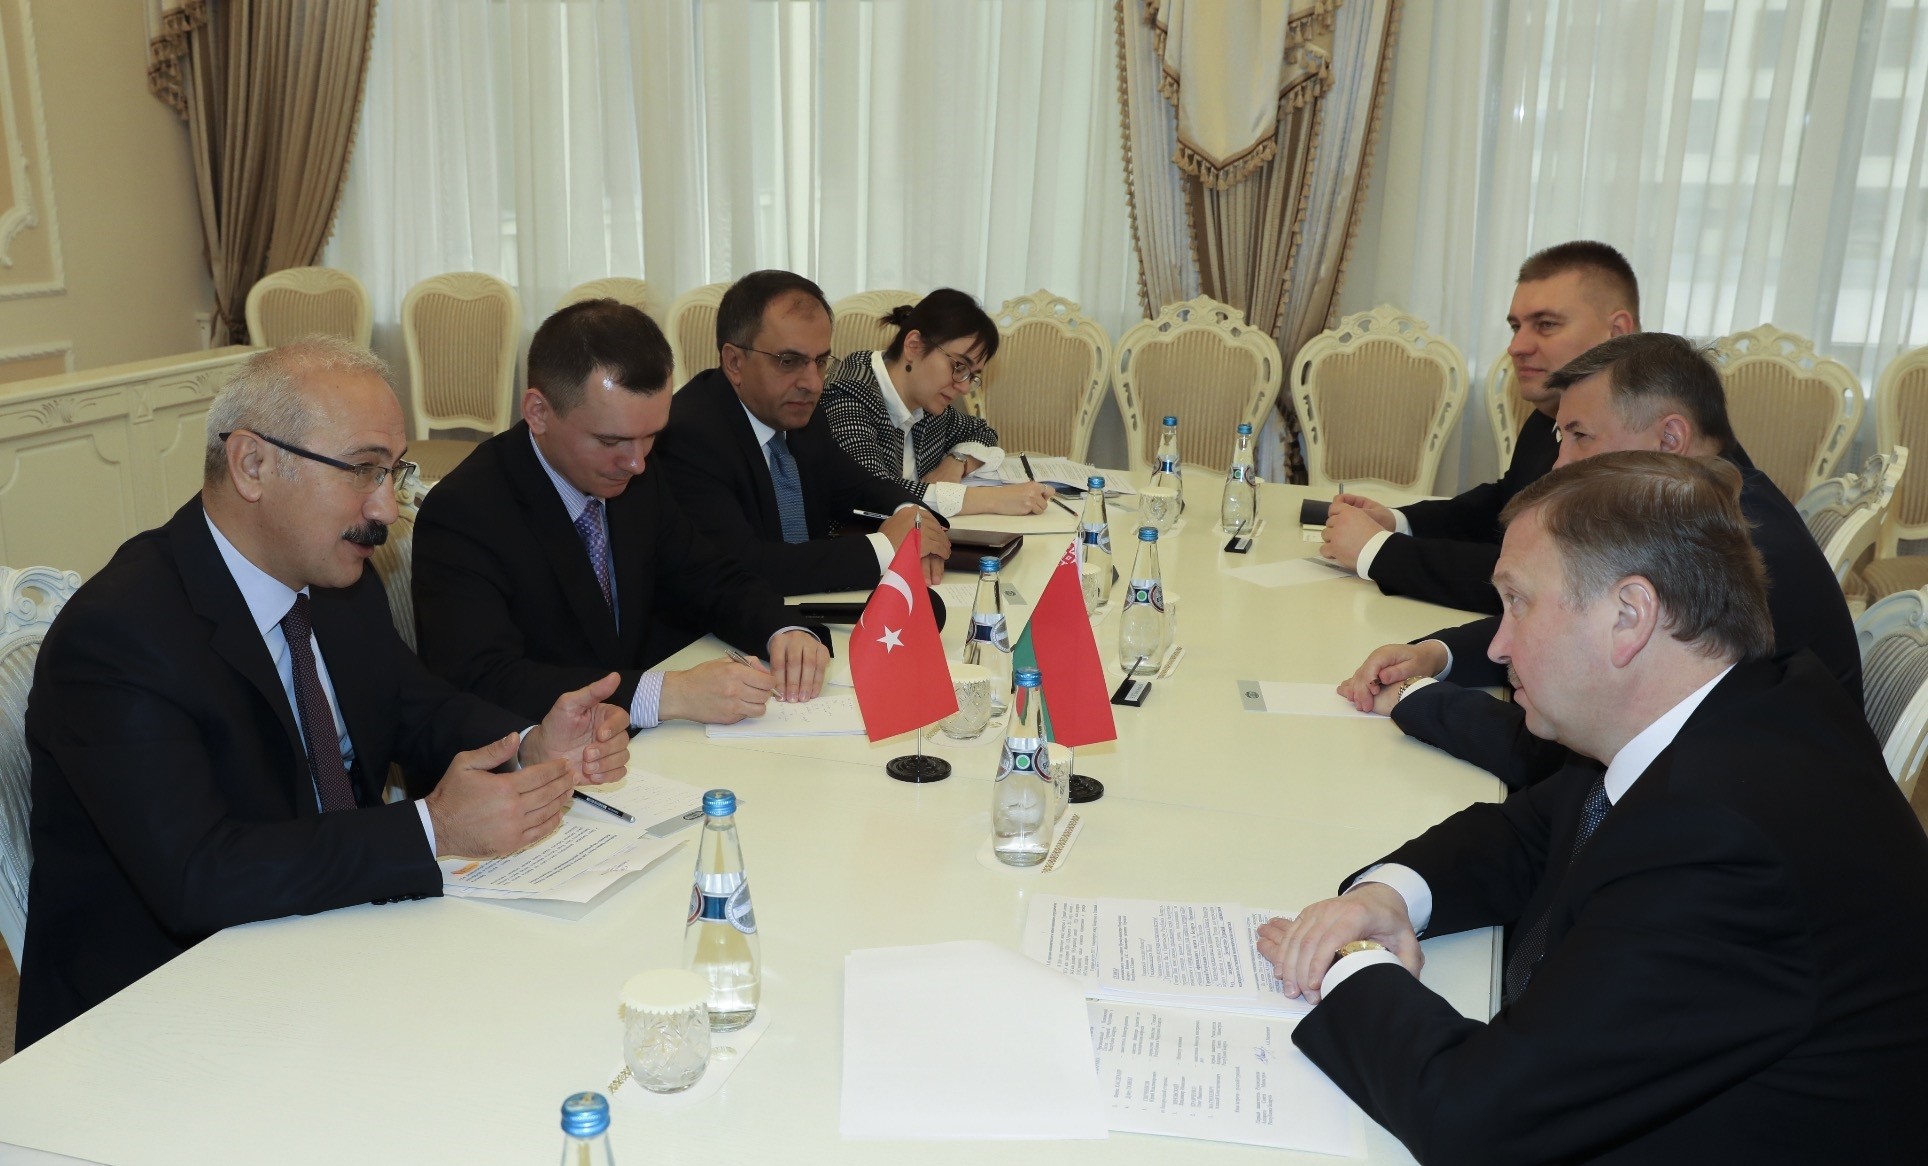 Development Minister Elvan (L) meets with Belarusian Prime Minister Kobyakov (R) while in Belarus, Oct. 18.